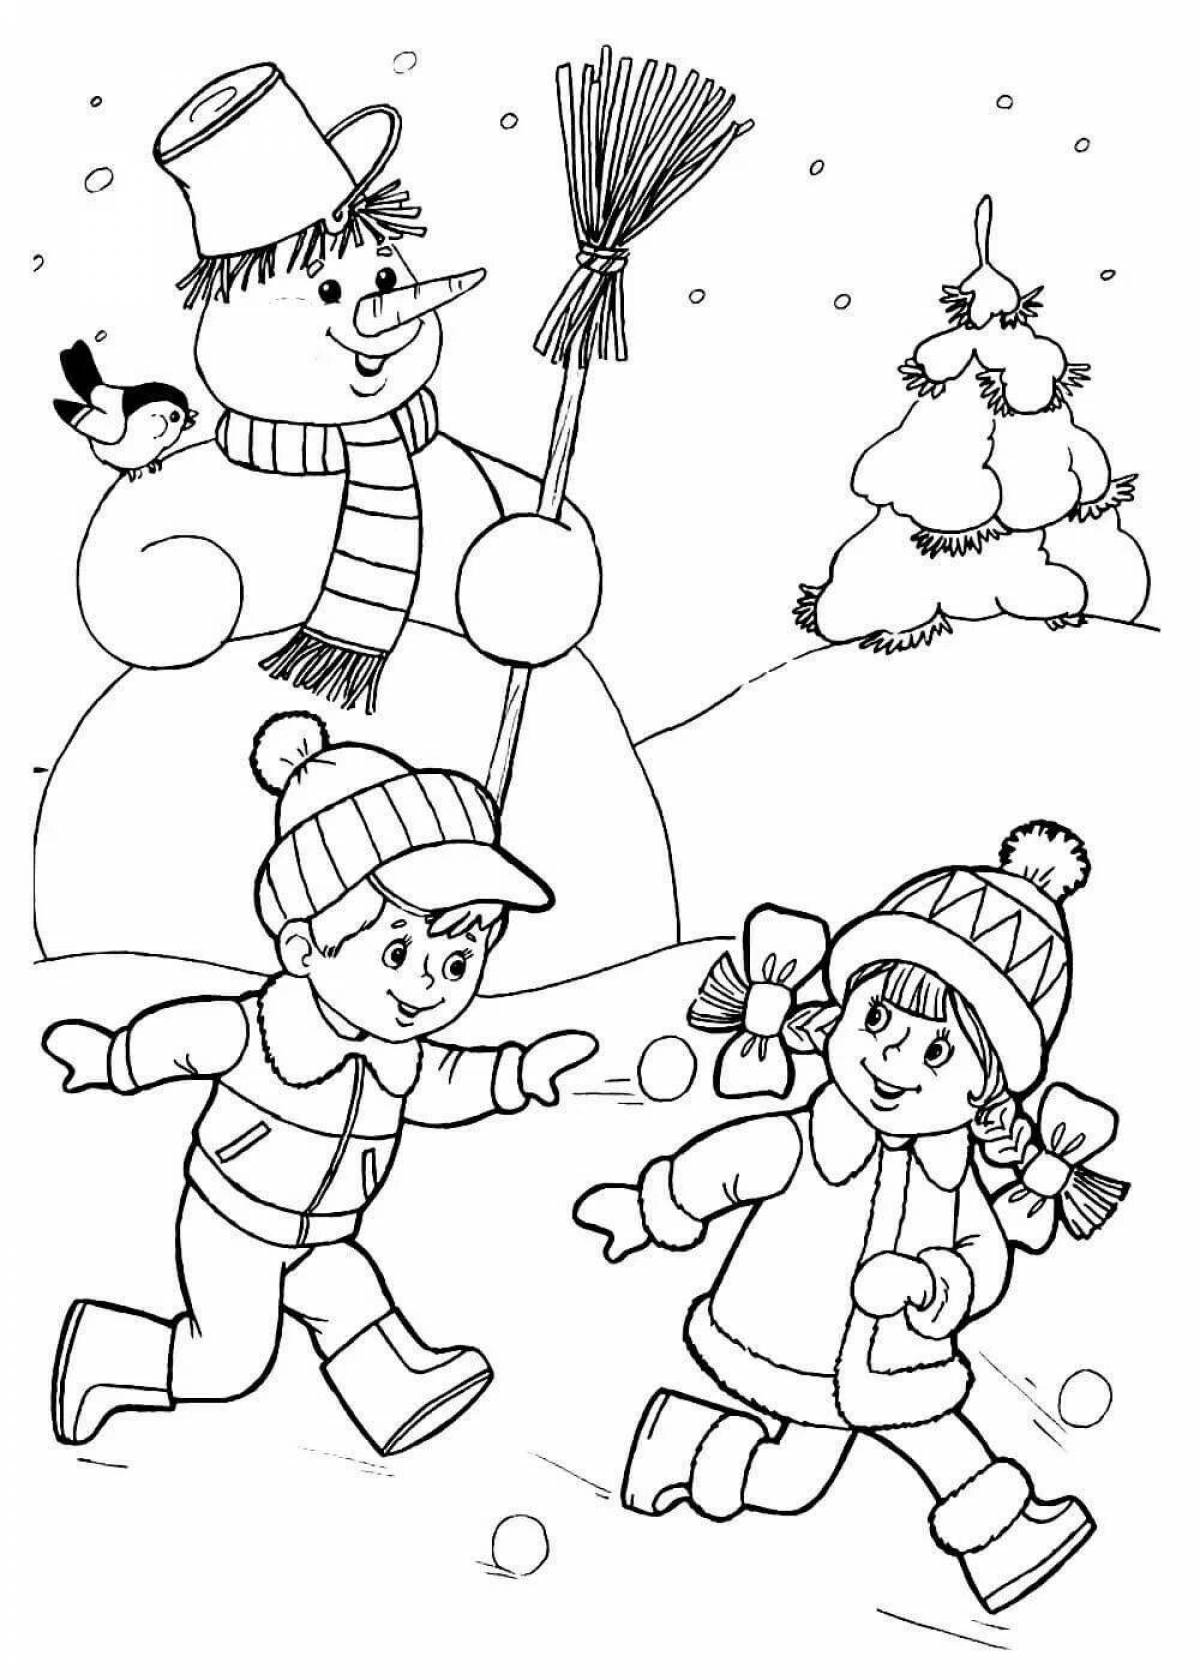 Color crazy snowball fight coloring book